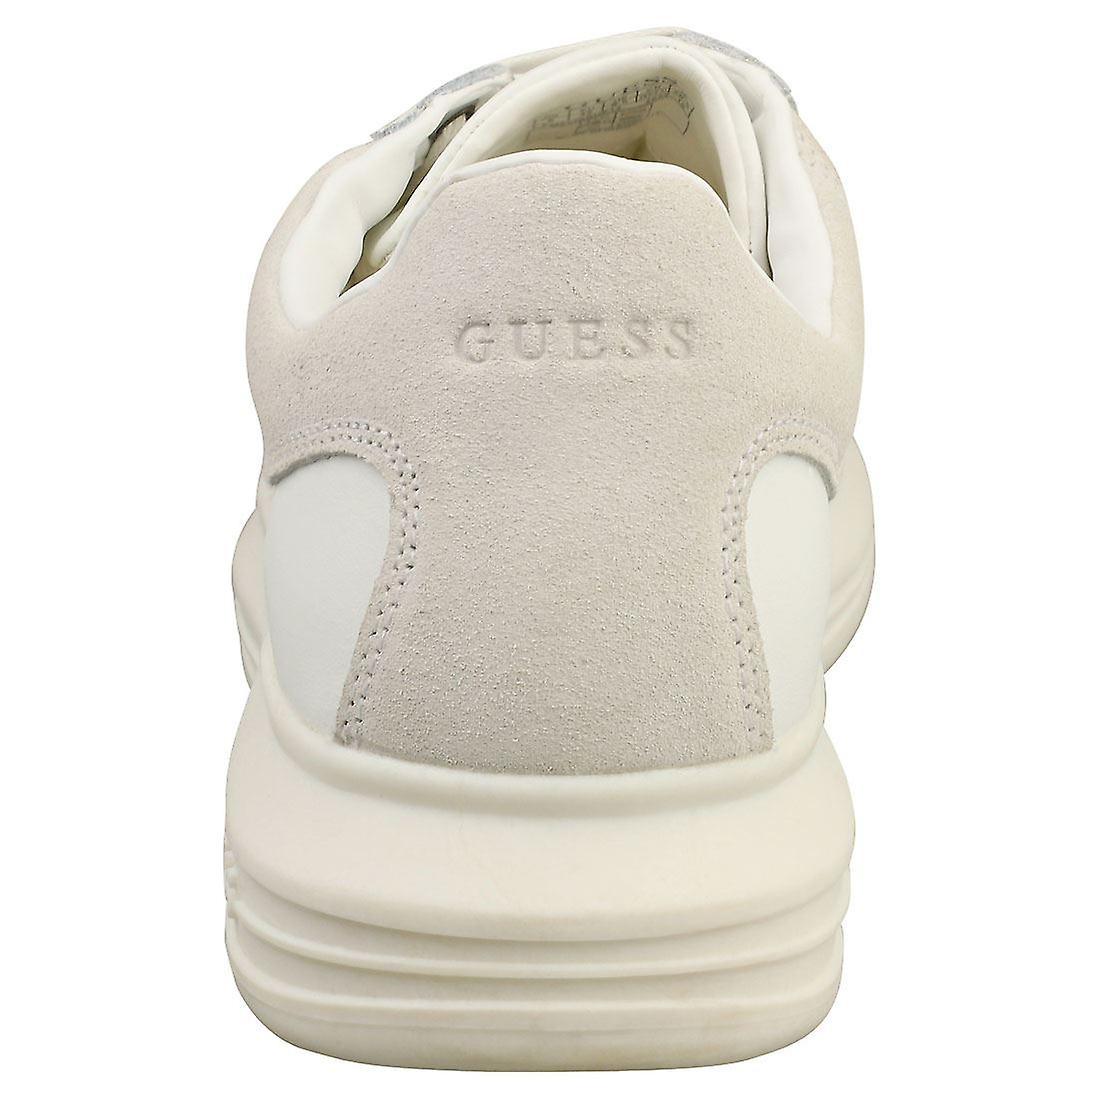 GUESS  Mens Casual Trainers in White